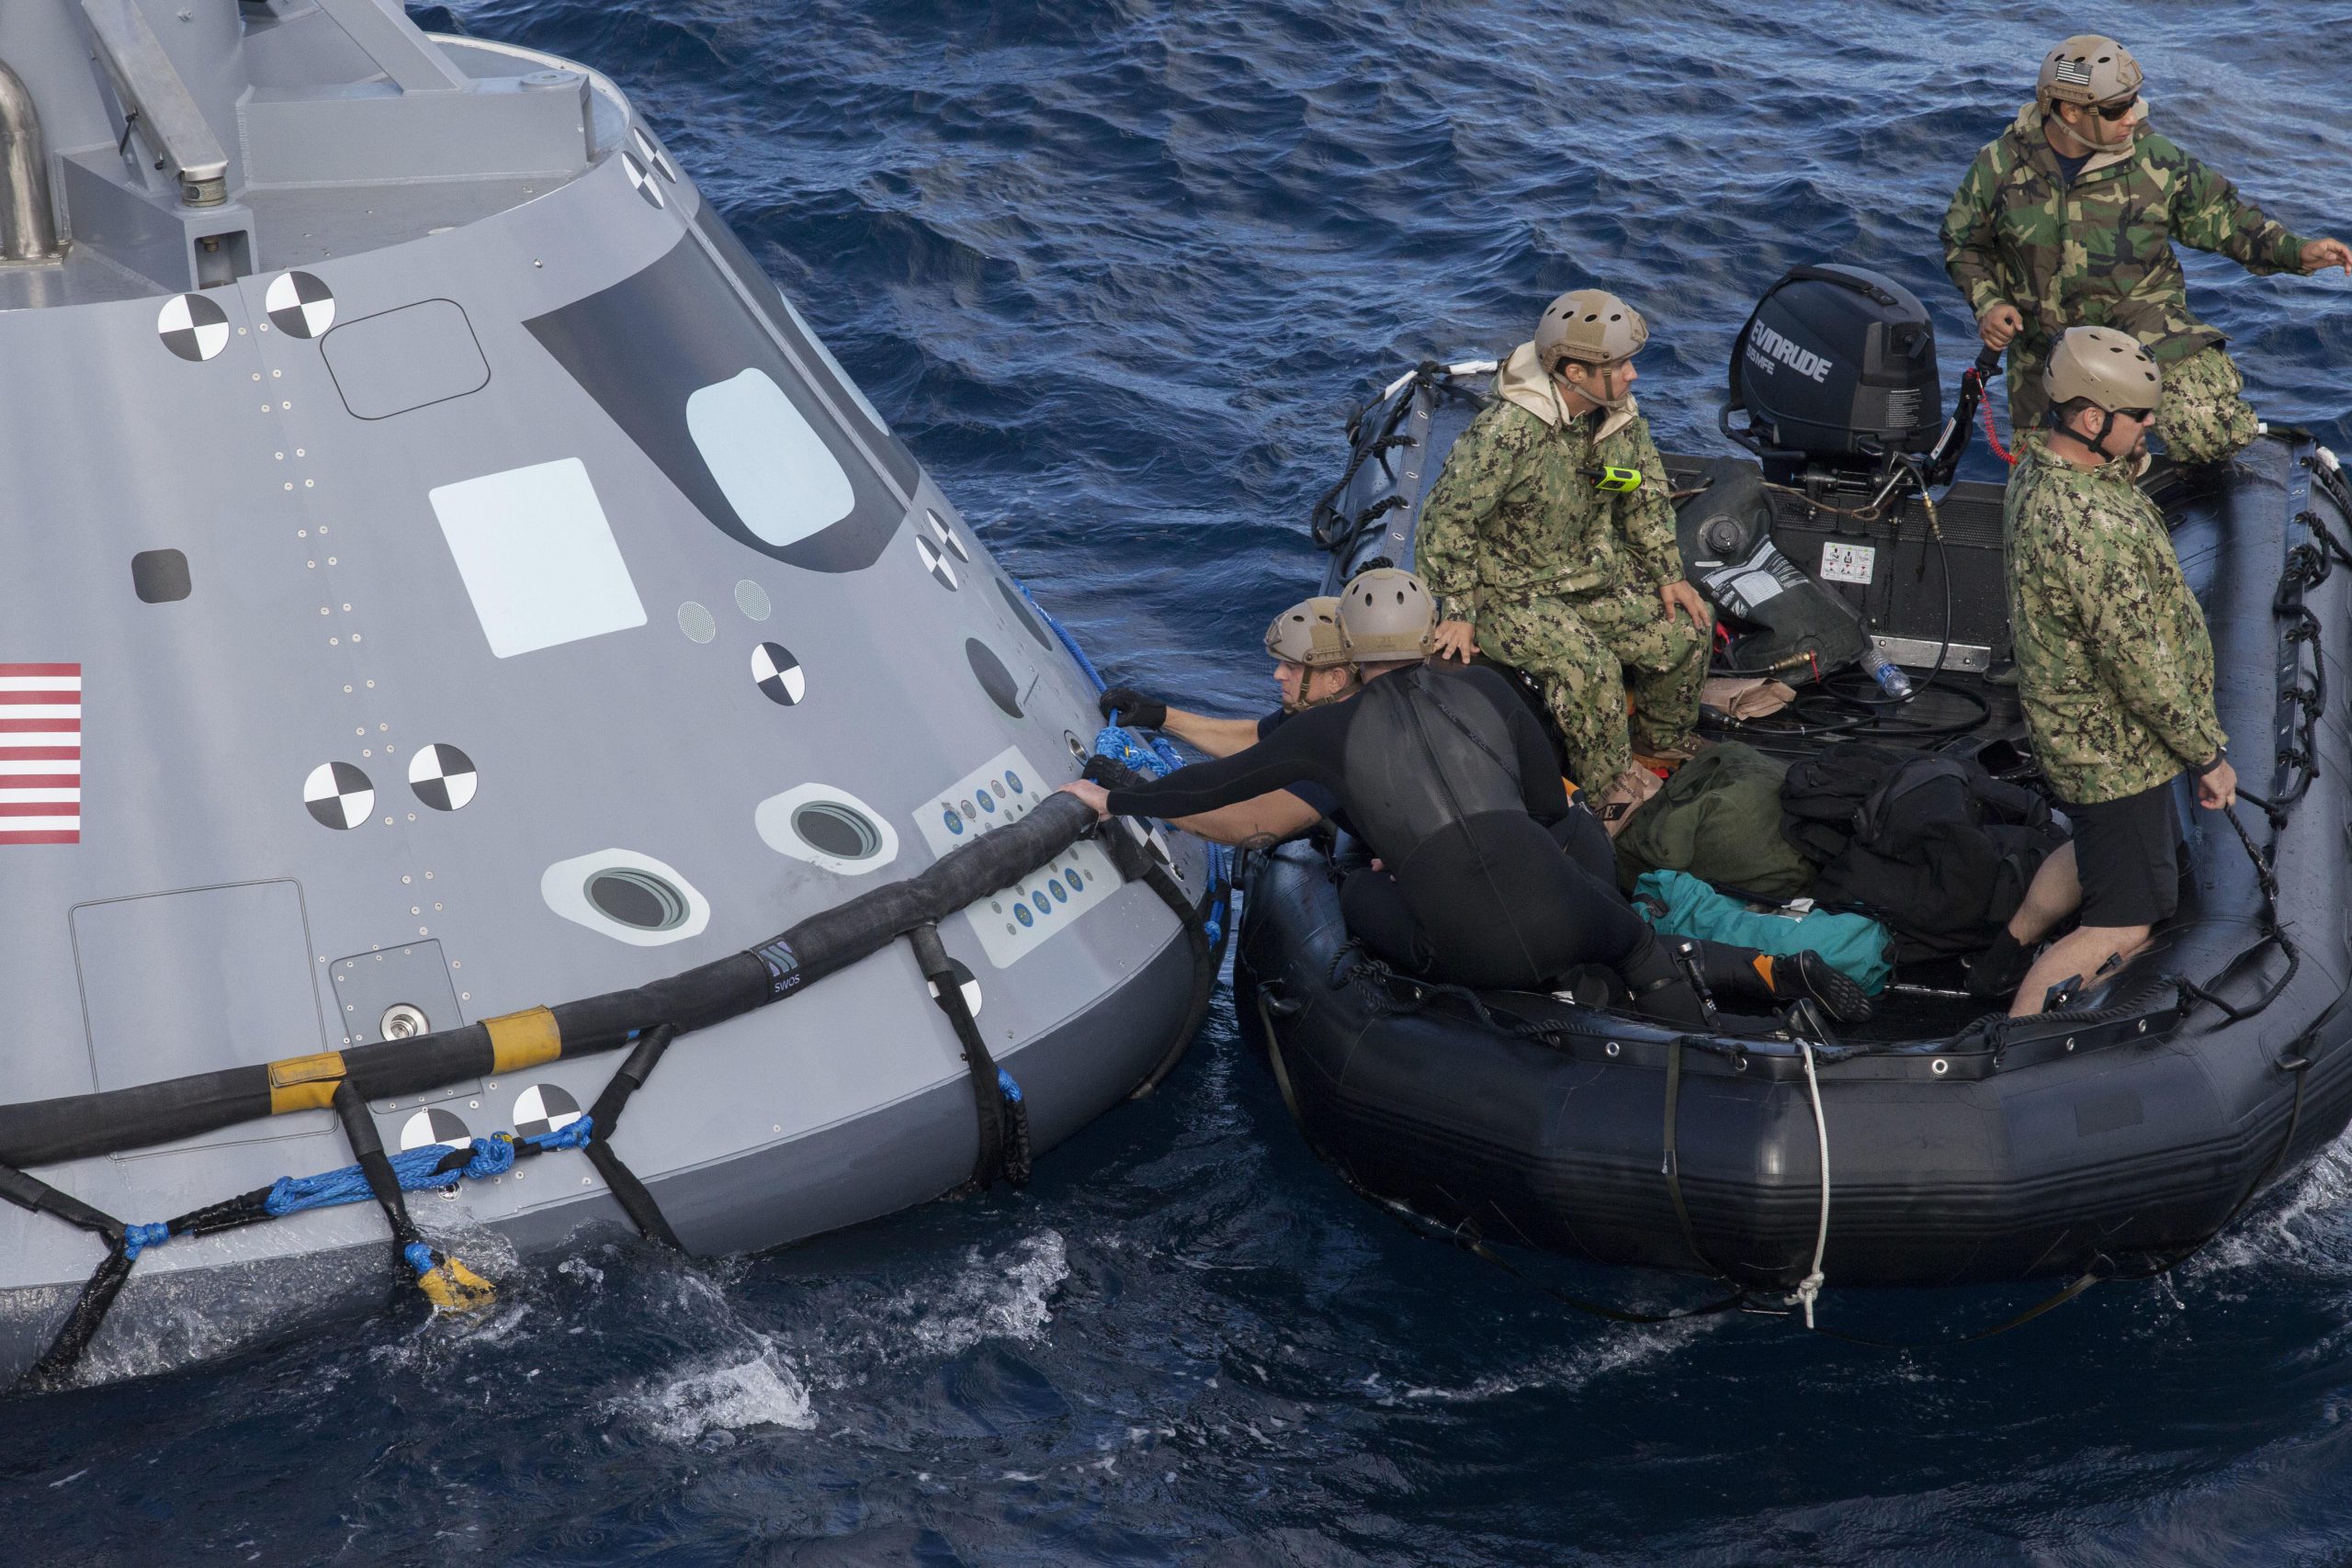 Navy divers and other personnel in a Zodiac boat secure a harness around a test version of the Orion crew module during Underway Recovery Test 5 in the Pacific Ocean off the coast of California, Oct. 28, 2016. Members of the New York Air National Guard's 106th Rescue Wing will participate in a mission in Hawaii designed to test space capsule recovery techniques and equipment, although they will not work with a capsule simulator like this one. Orion is the exploration spacecraft designed to carry astronauts to destinations not yet explored by humans. NASA photo. -